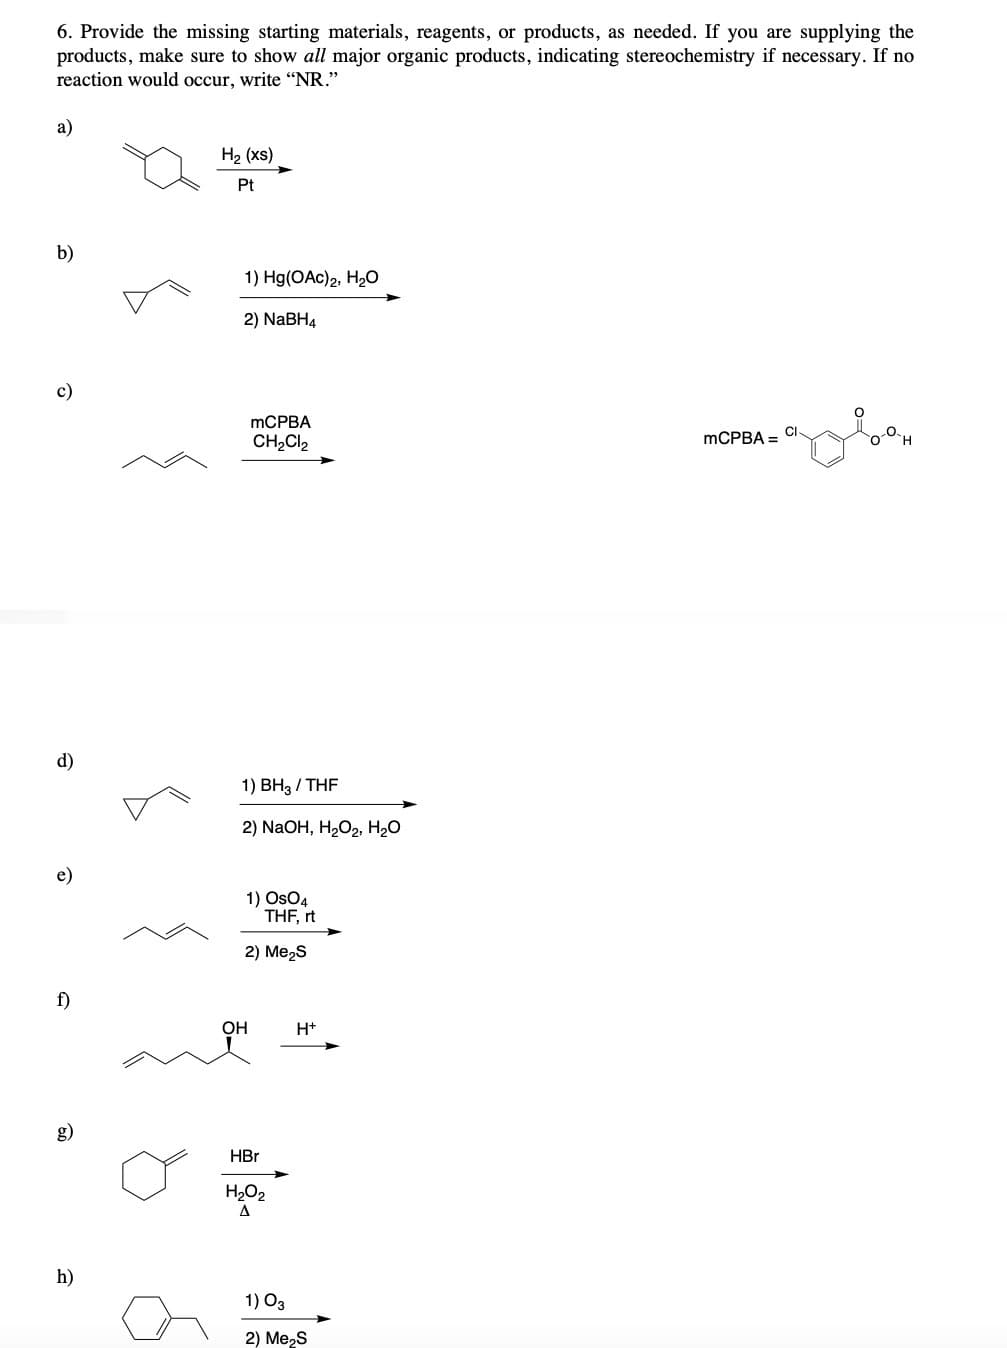 6. Provide the missing starting materials, reagents, or products, as needed. If you are supplying the
products, make sure to show all major organic products, indicating stereochemistry if necessary. If no
reaction would occur, write "NR."
a)
H₂ (xs)
Pt
1) Hg(OAc)2, H₂O
2) NaBH4
O
mCPBA
CH₂Cl2
mCPBA =
1) BH3 / THF
2) NaOH, H₂O₂, H₂O
1) OsO4
THF, rt
2) Me₂S
b)
c)
d)
e)
f)
h)
OH
HBr
H₂O₂
A
H+
1) 03
2) Me₂S
CI